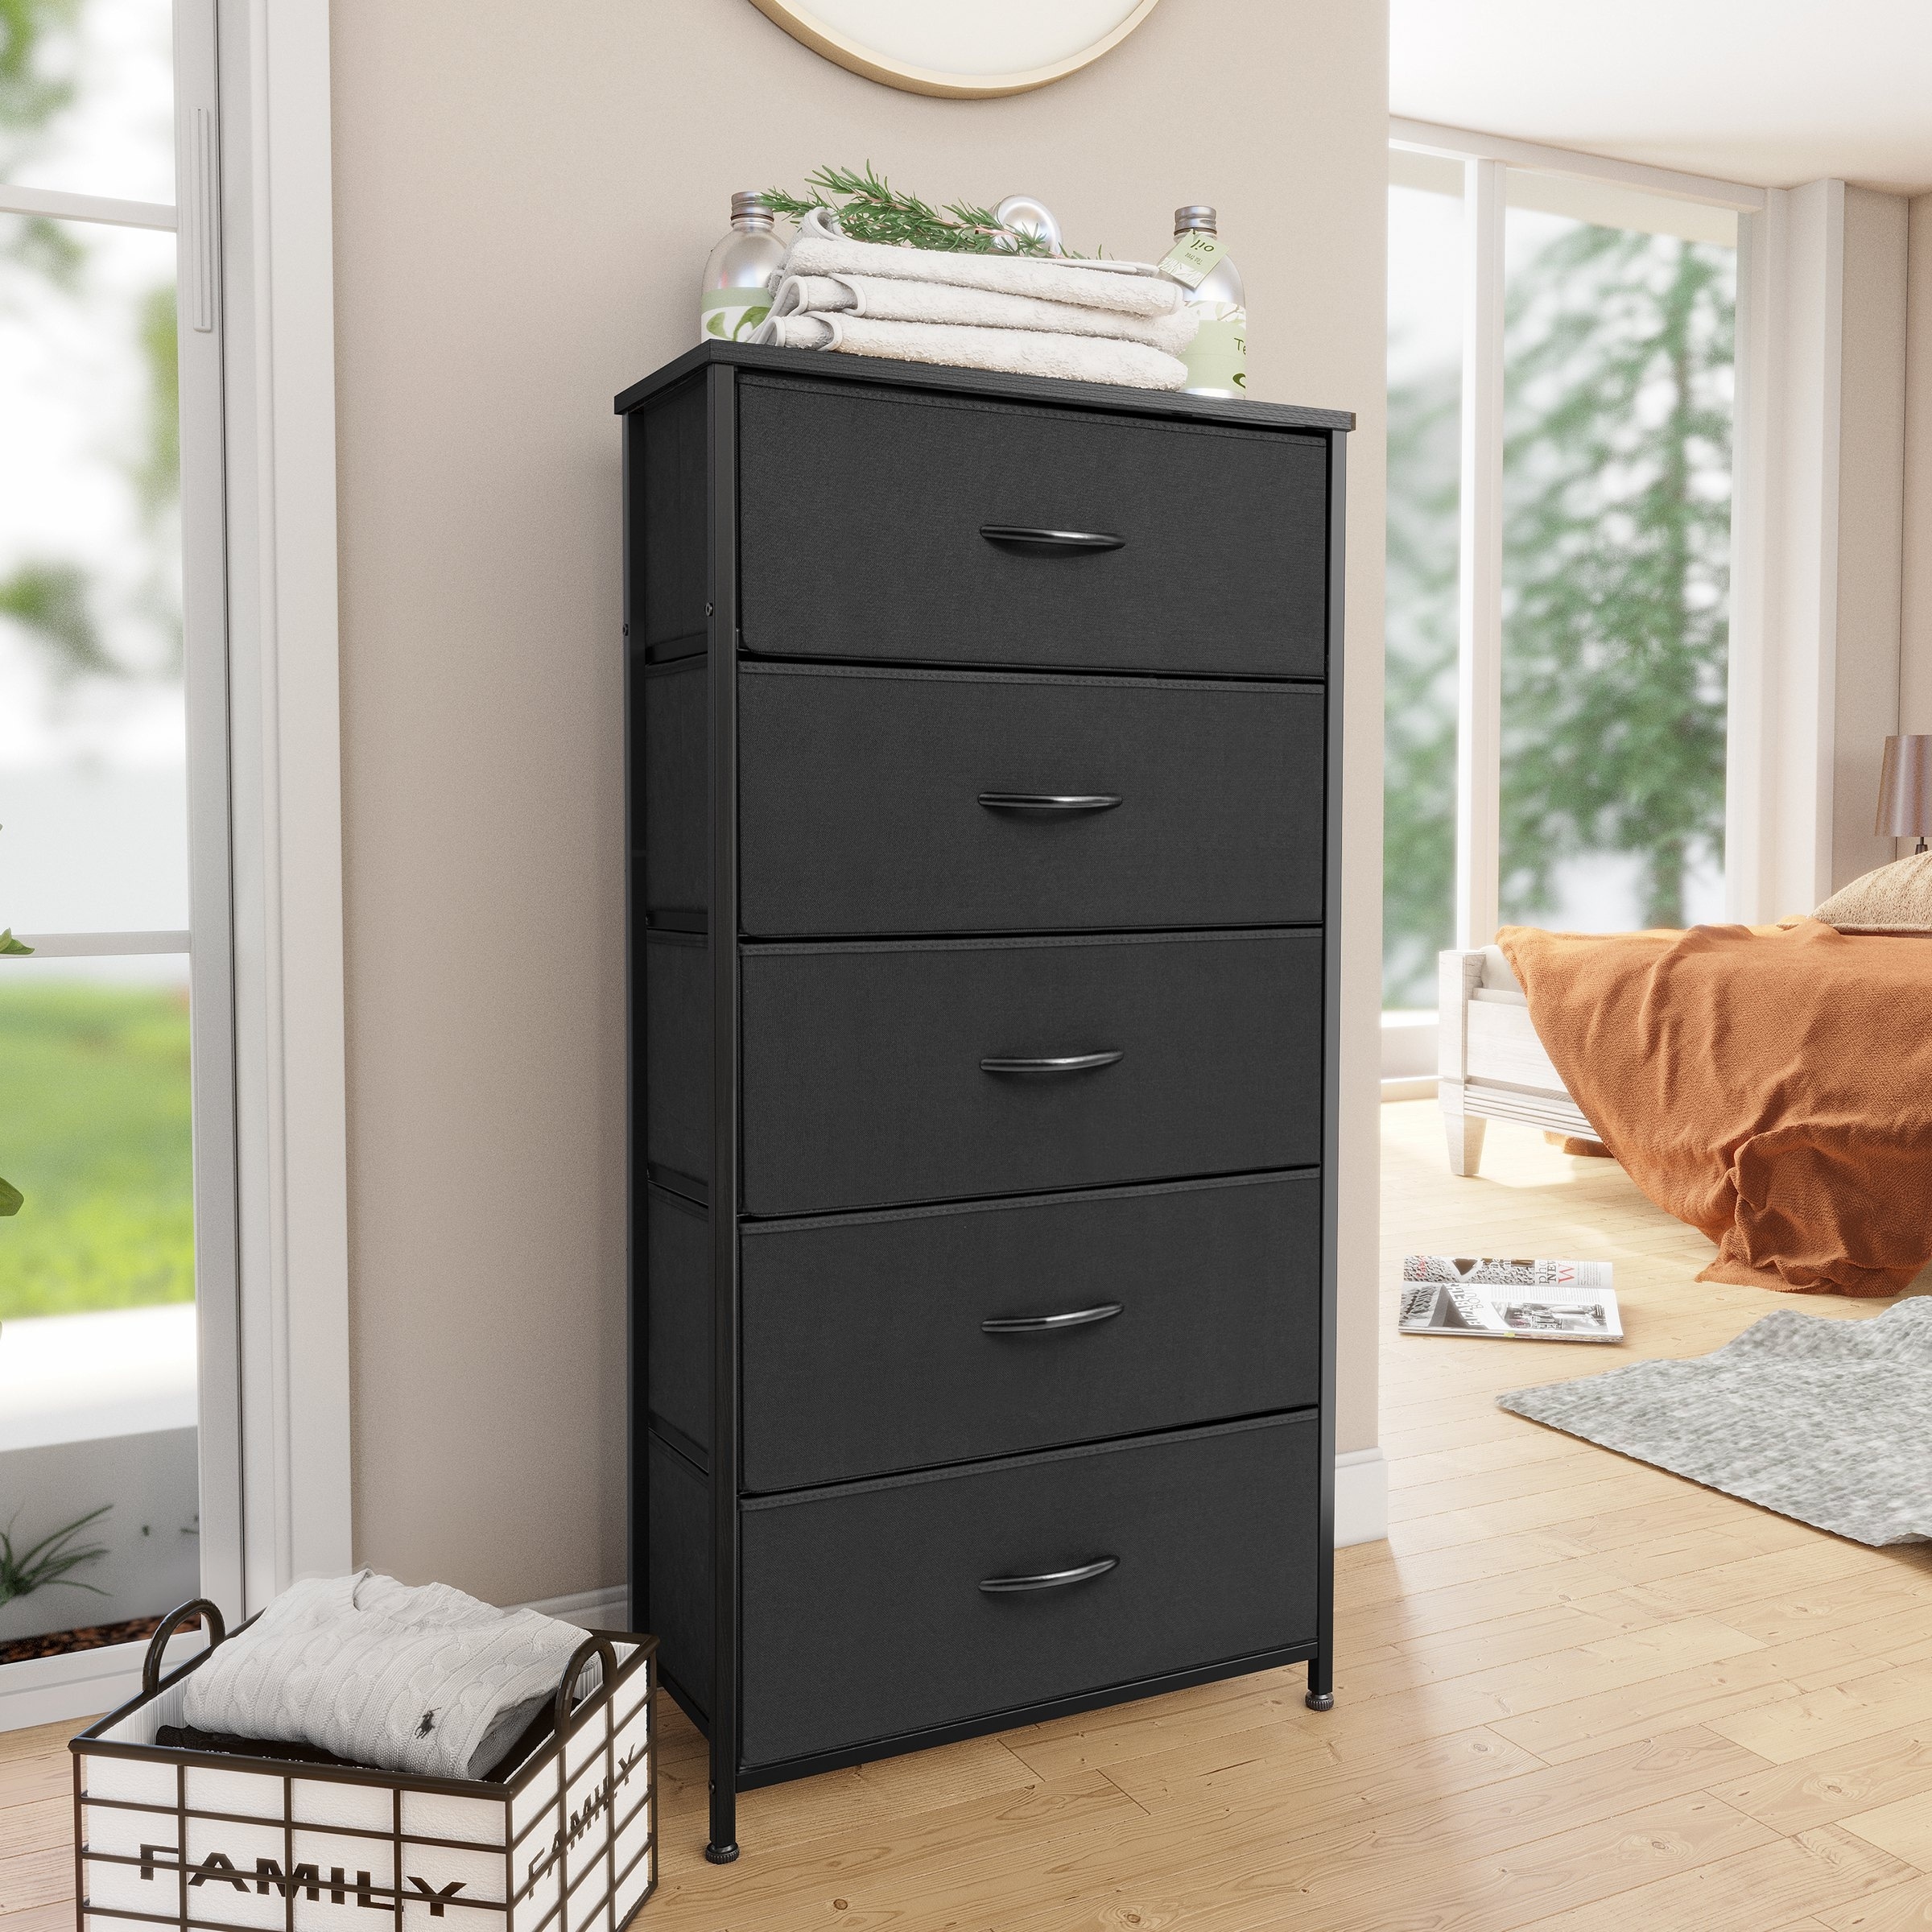 https://ak1.ostkcdn.com/images/products/is/images/direct/aef0bfae27b3559396ef03a91afb4184cf427989/Pellebant-Fabric-Vertical-Dresser-Storage-Tower-with-5-Drawers.jpg